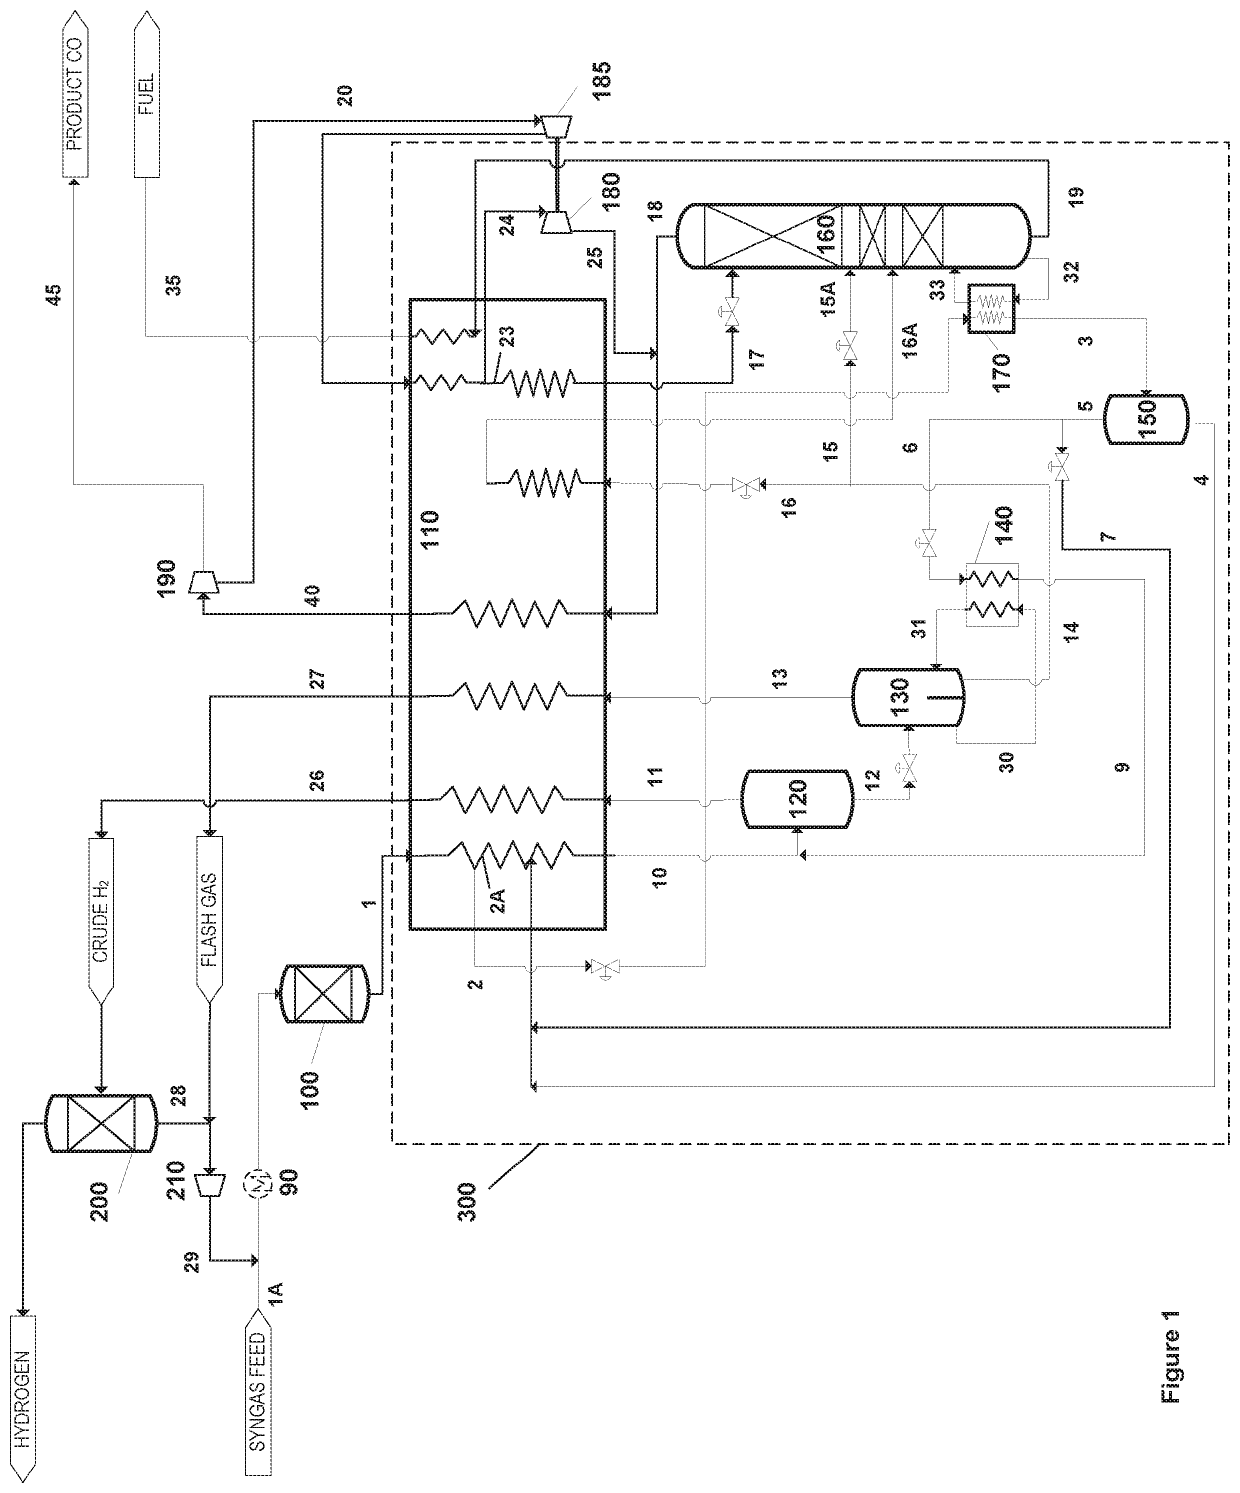 Process and apparatus for producing carbon monoxide